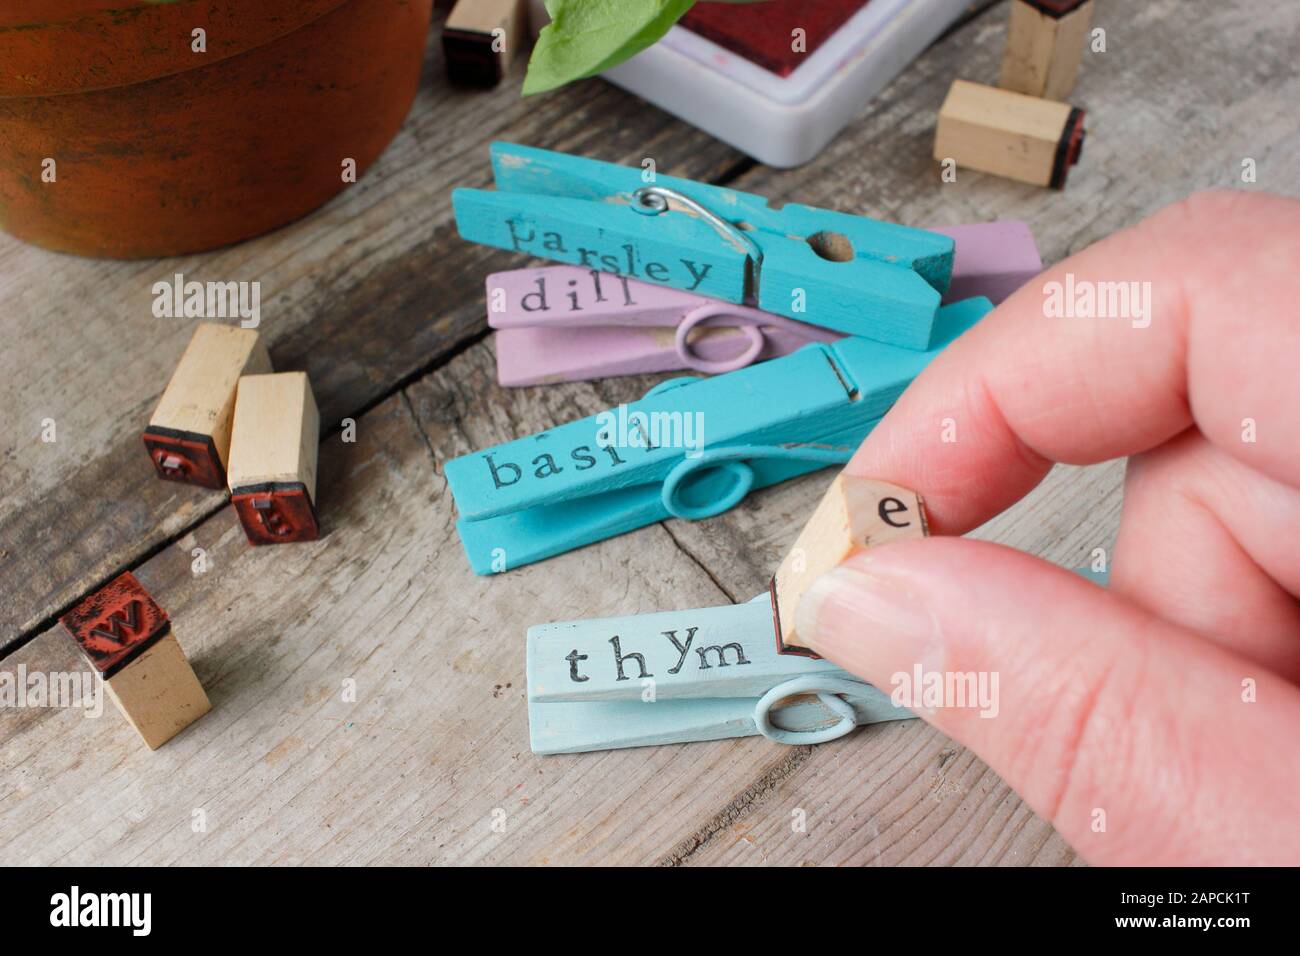 Making plant labels. Re-purposing wooden clothes pegs to make colourful plant labels with an inexpensive stamper Stock Photo